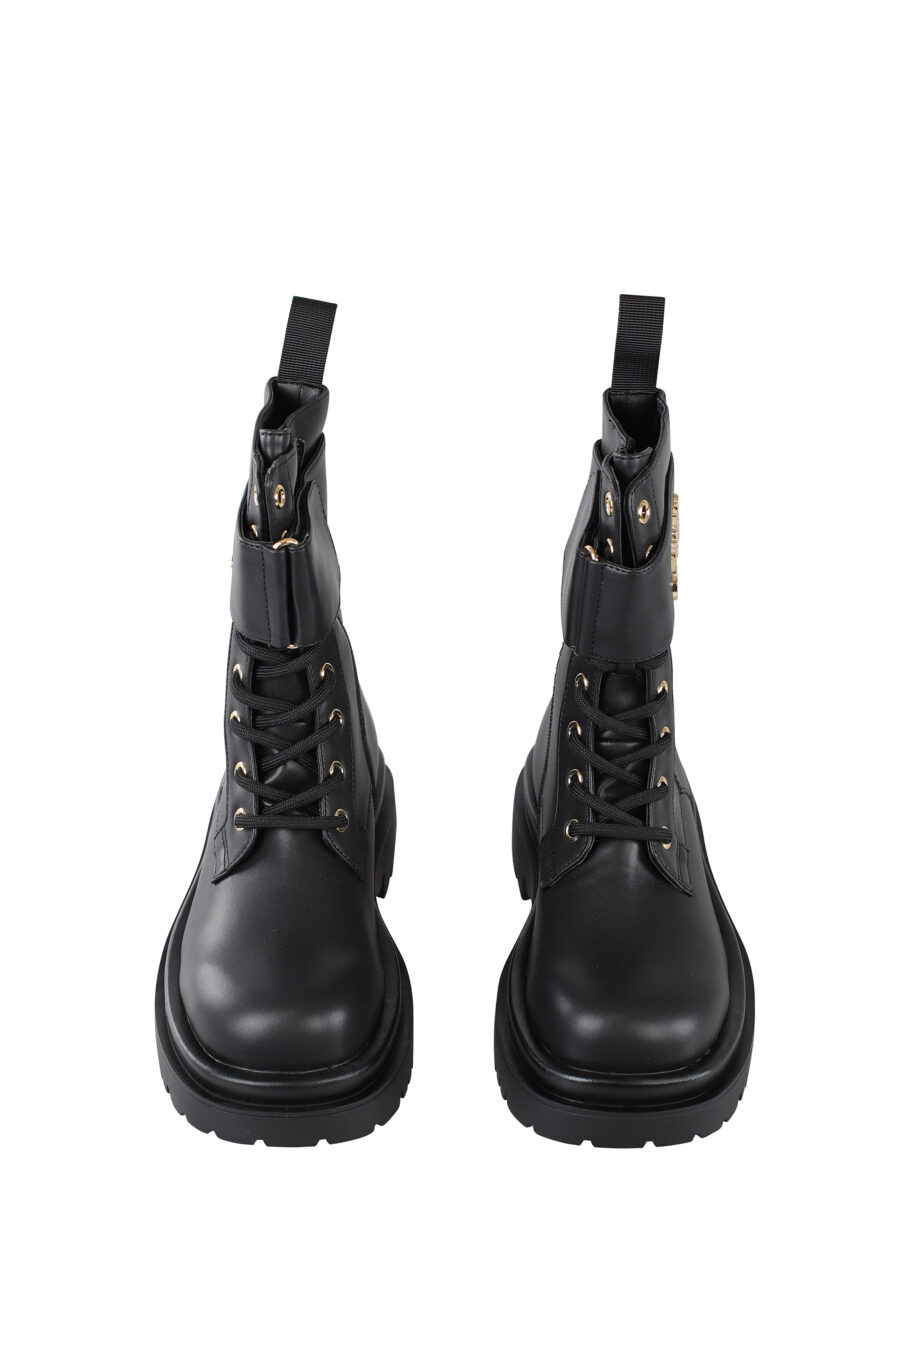 Black lace-up ankle boots with gold lettering logo - IMG 6686